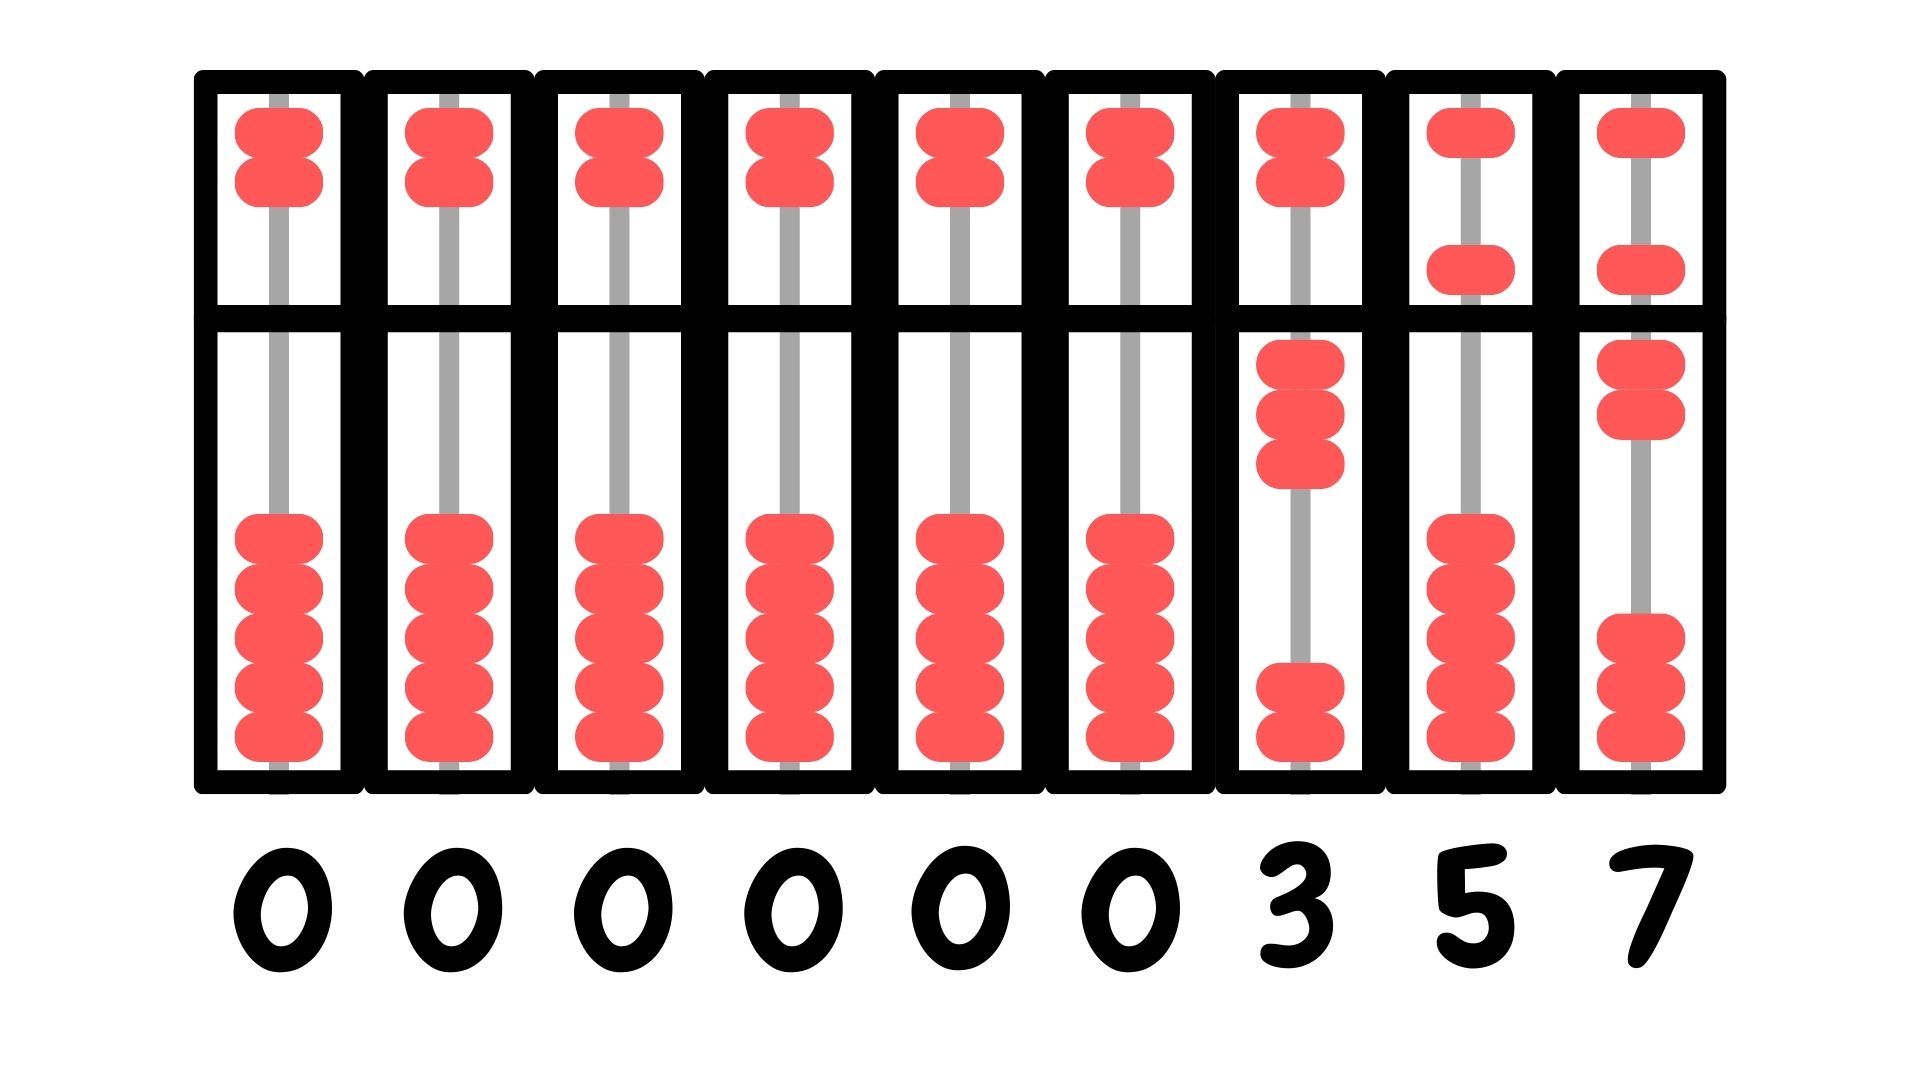 Diagram showing how number 357 is represented using the abacus